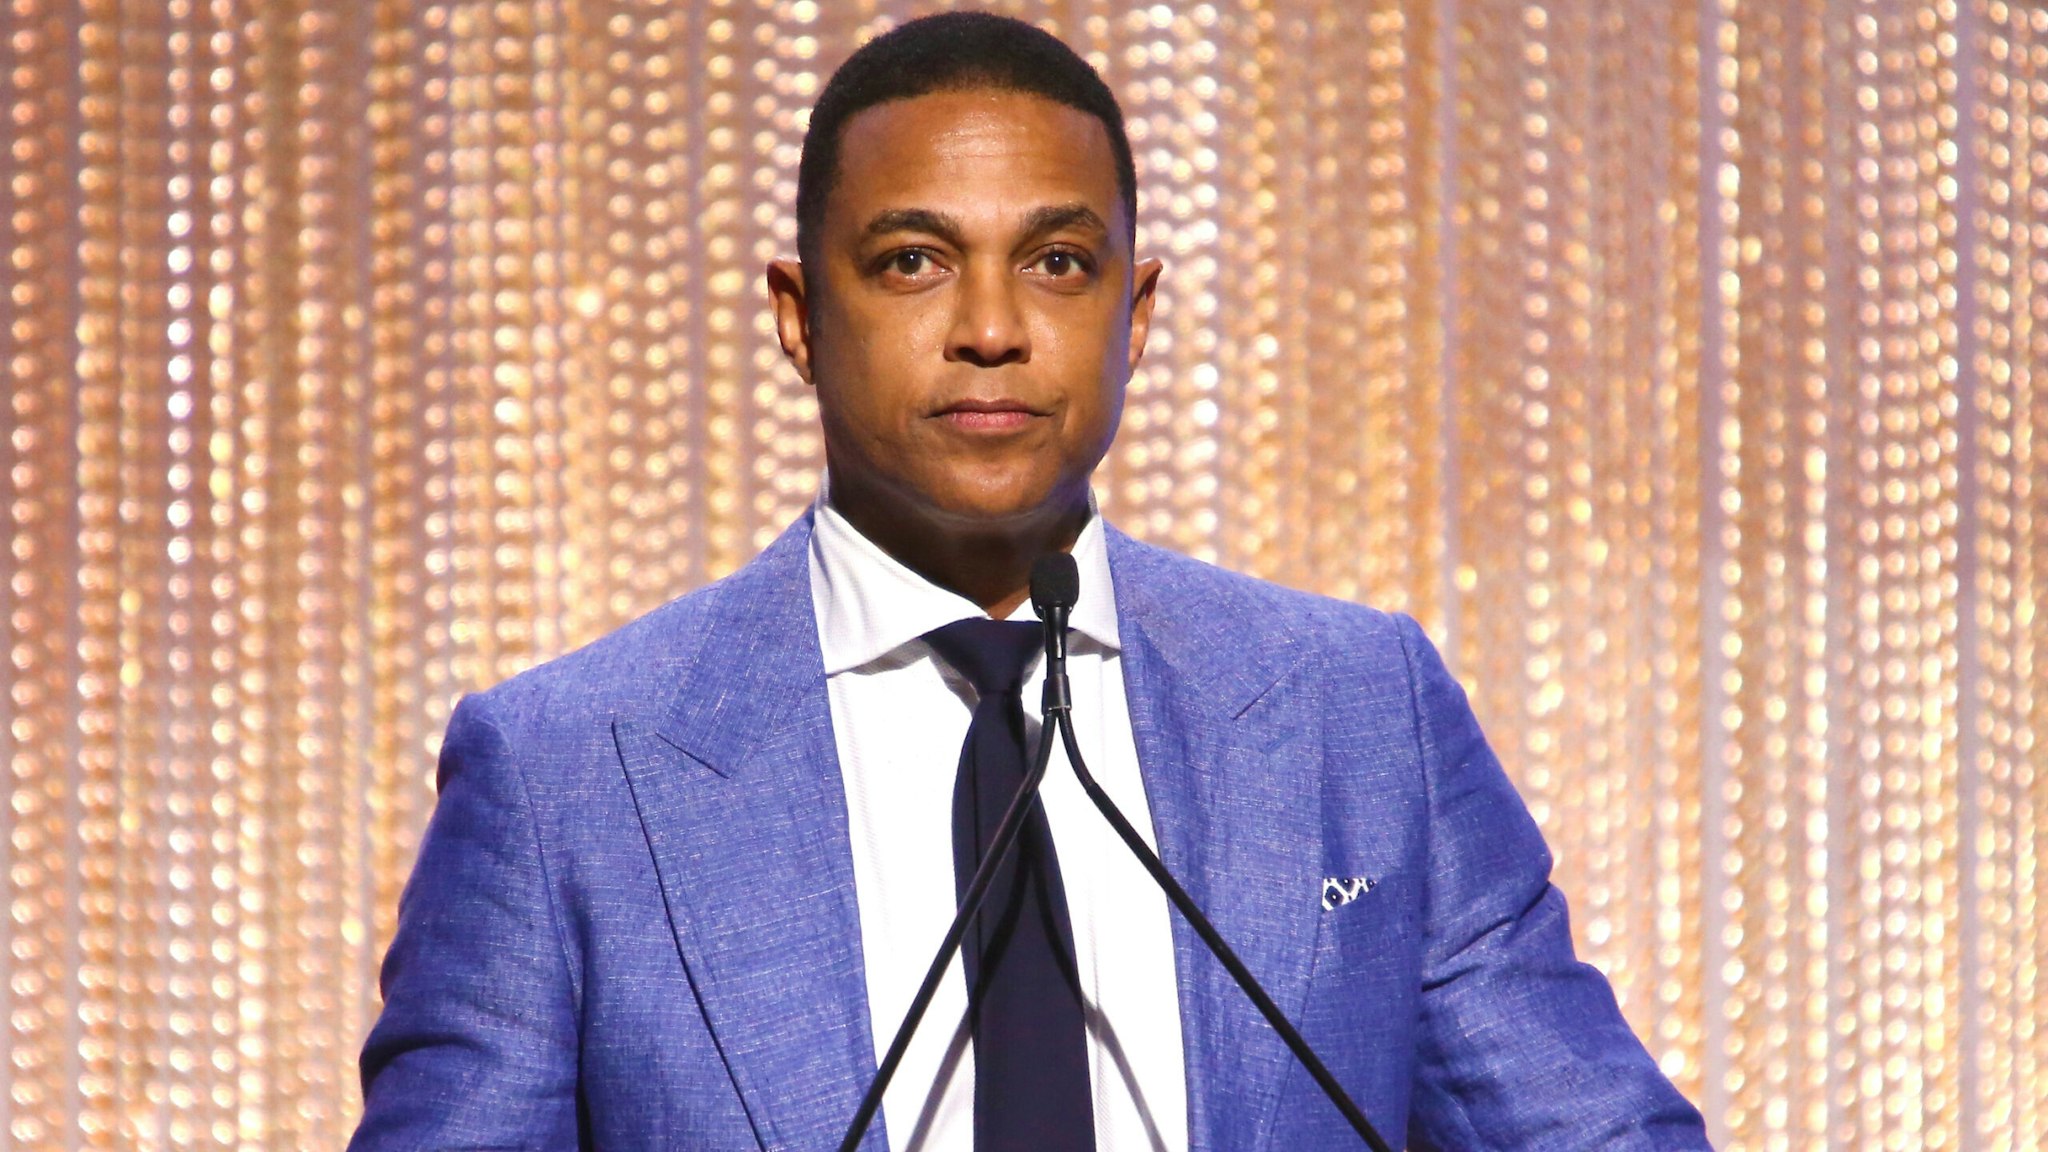 LOS ANGELES, CA - APRIL 30: Don Lemon speaks onstage during The Hollywood Reporter's Empowerment In Entertainment Event 2019 at Milk Studios on April 30, 2019 in Los Angeles, California.